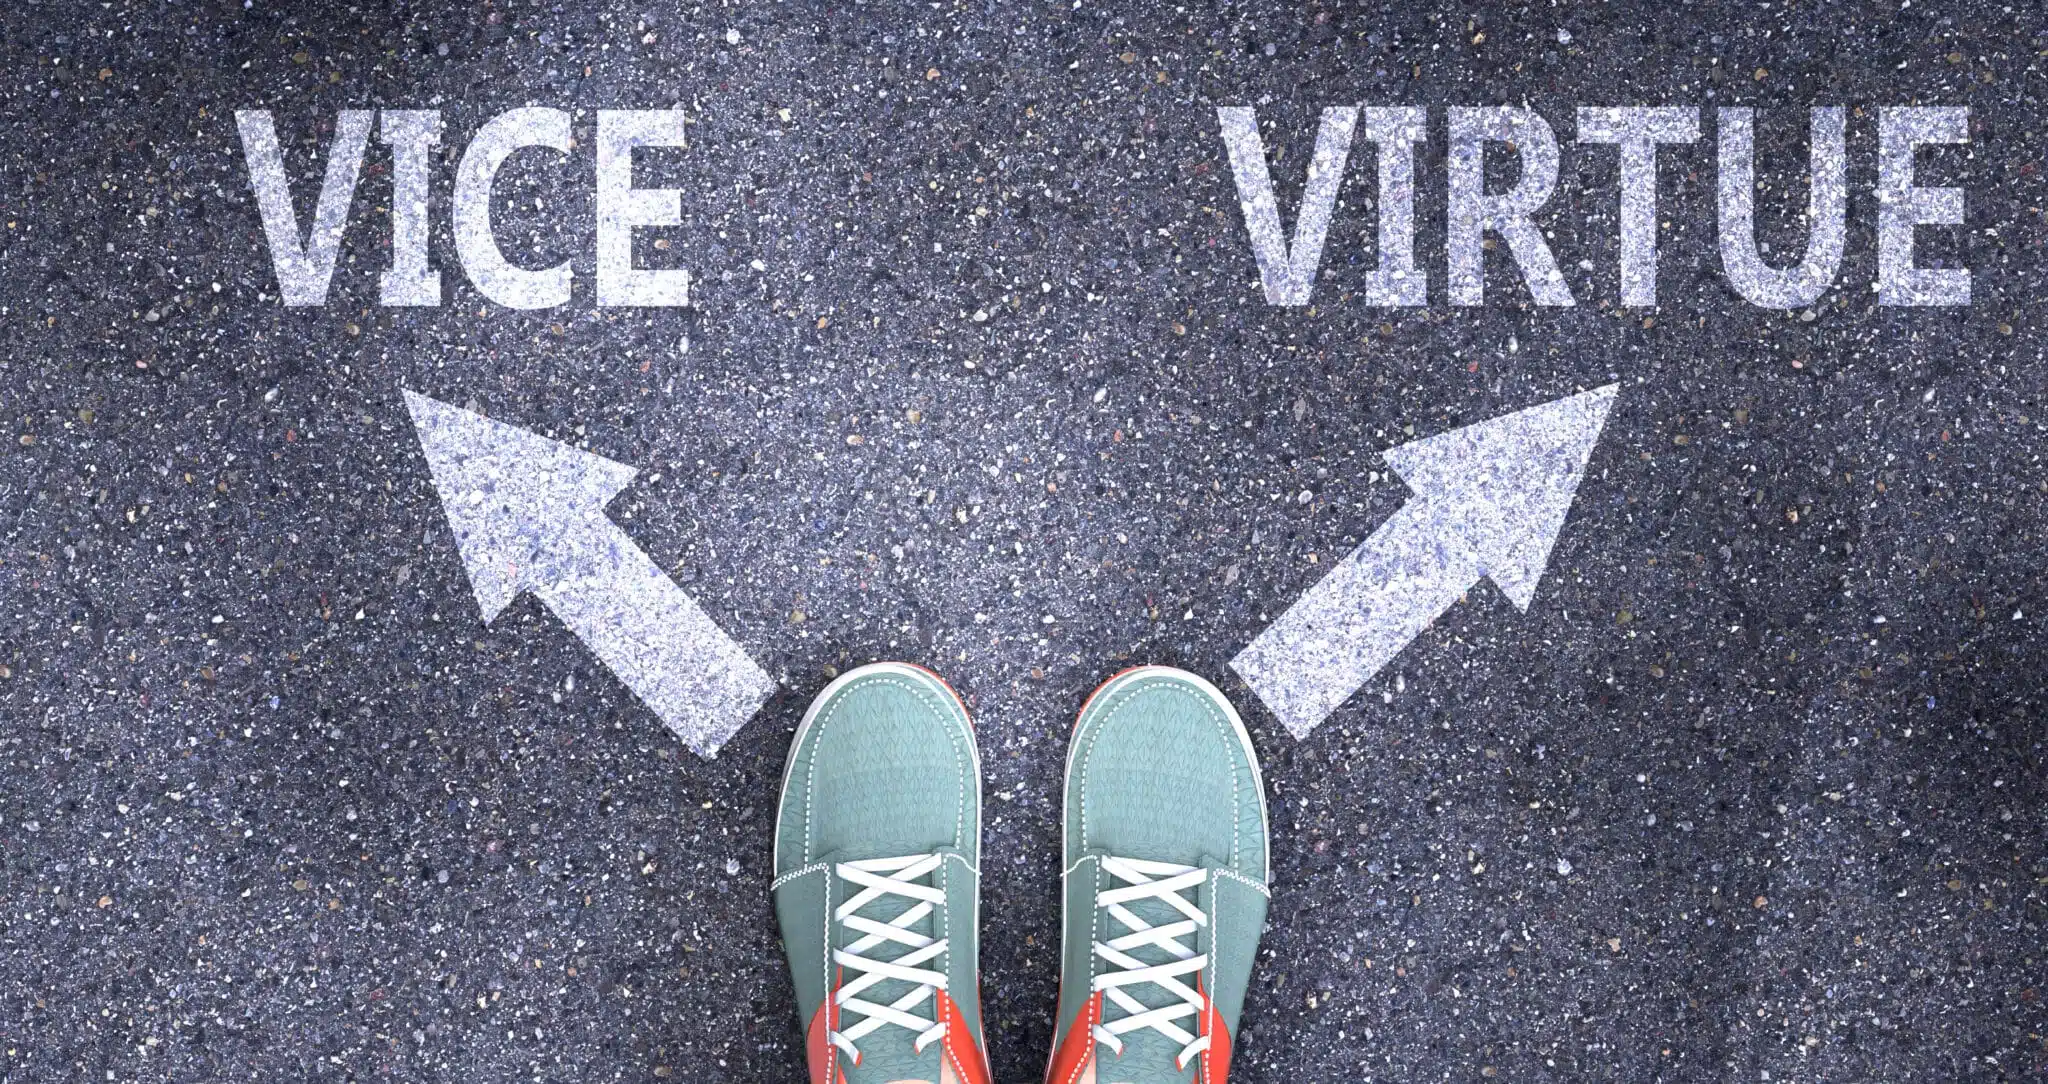 choice between vice and virtue